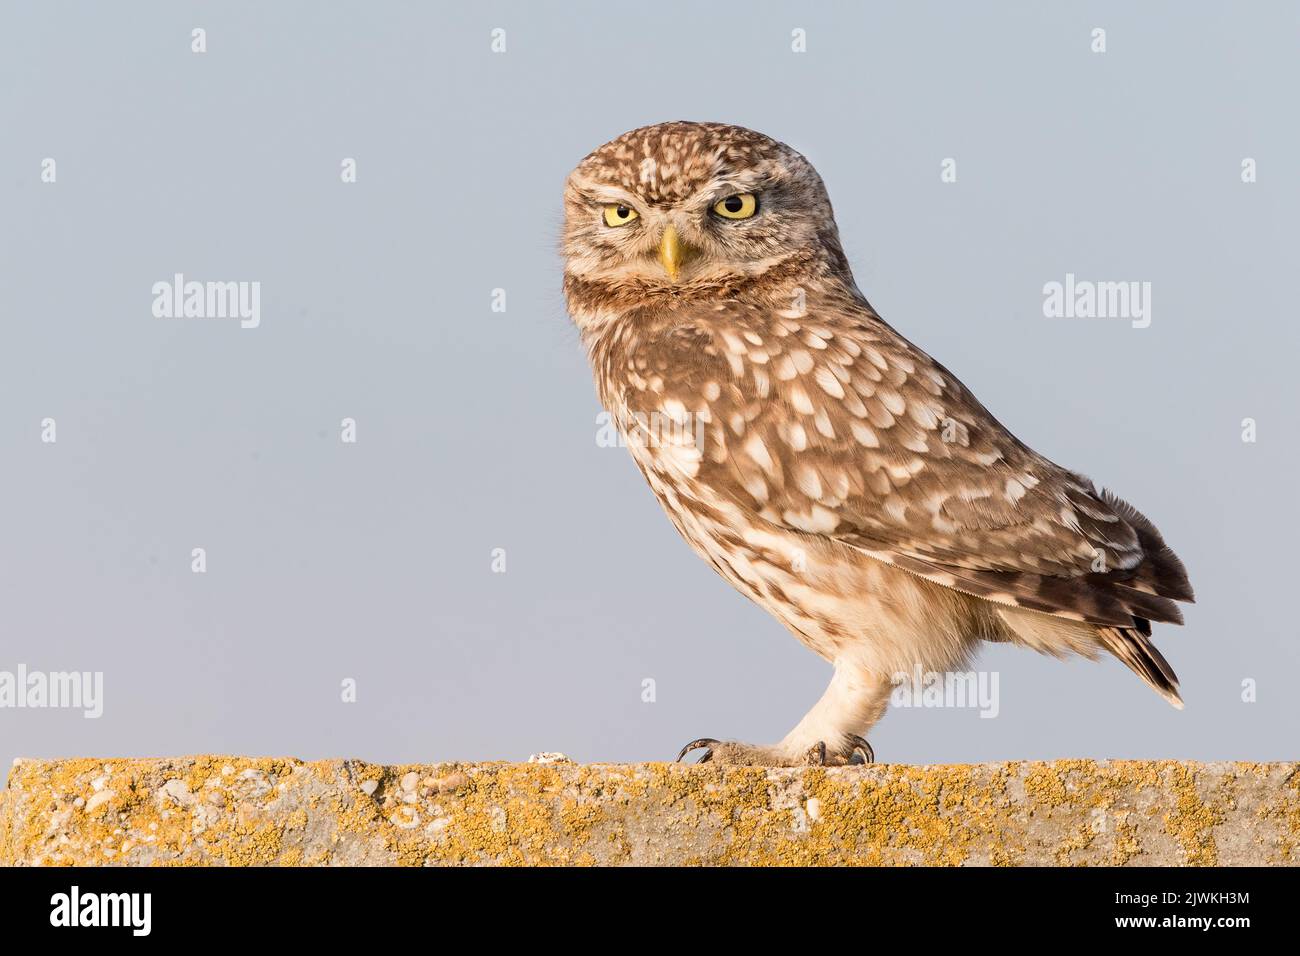 Little Owl (Athene noctua) standing on a agricultural sluice gate, Koros-Maros National Park, Hungary Stock Photo